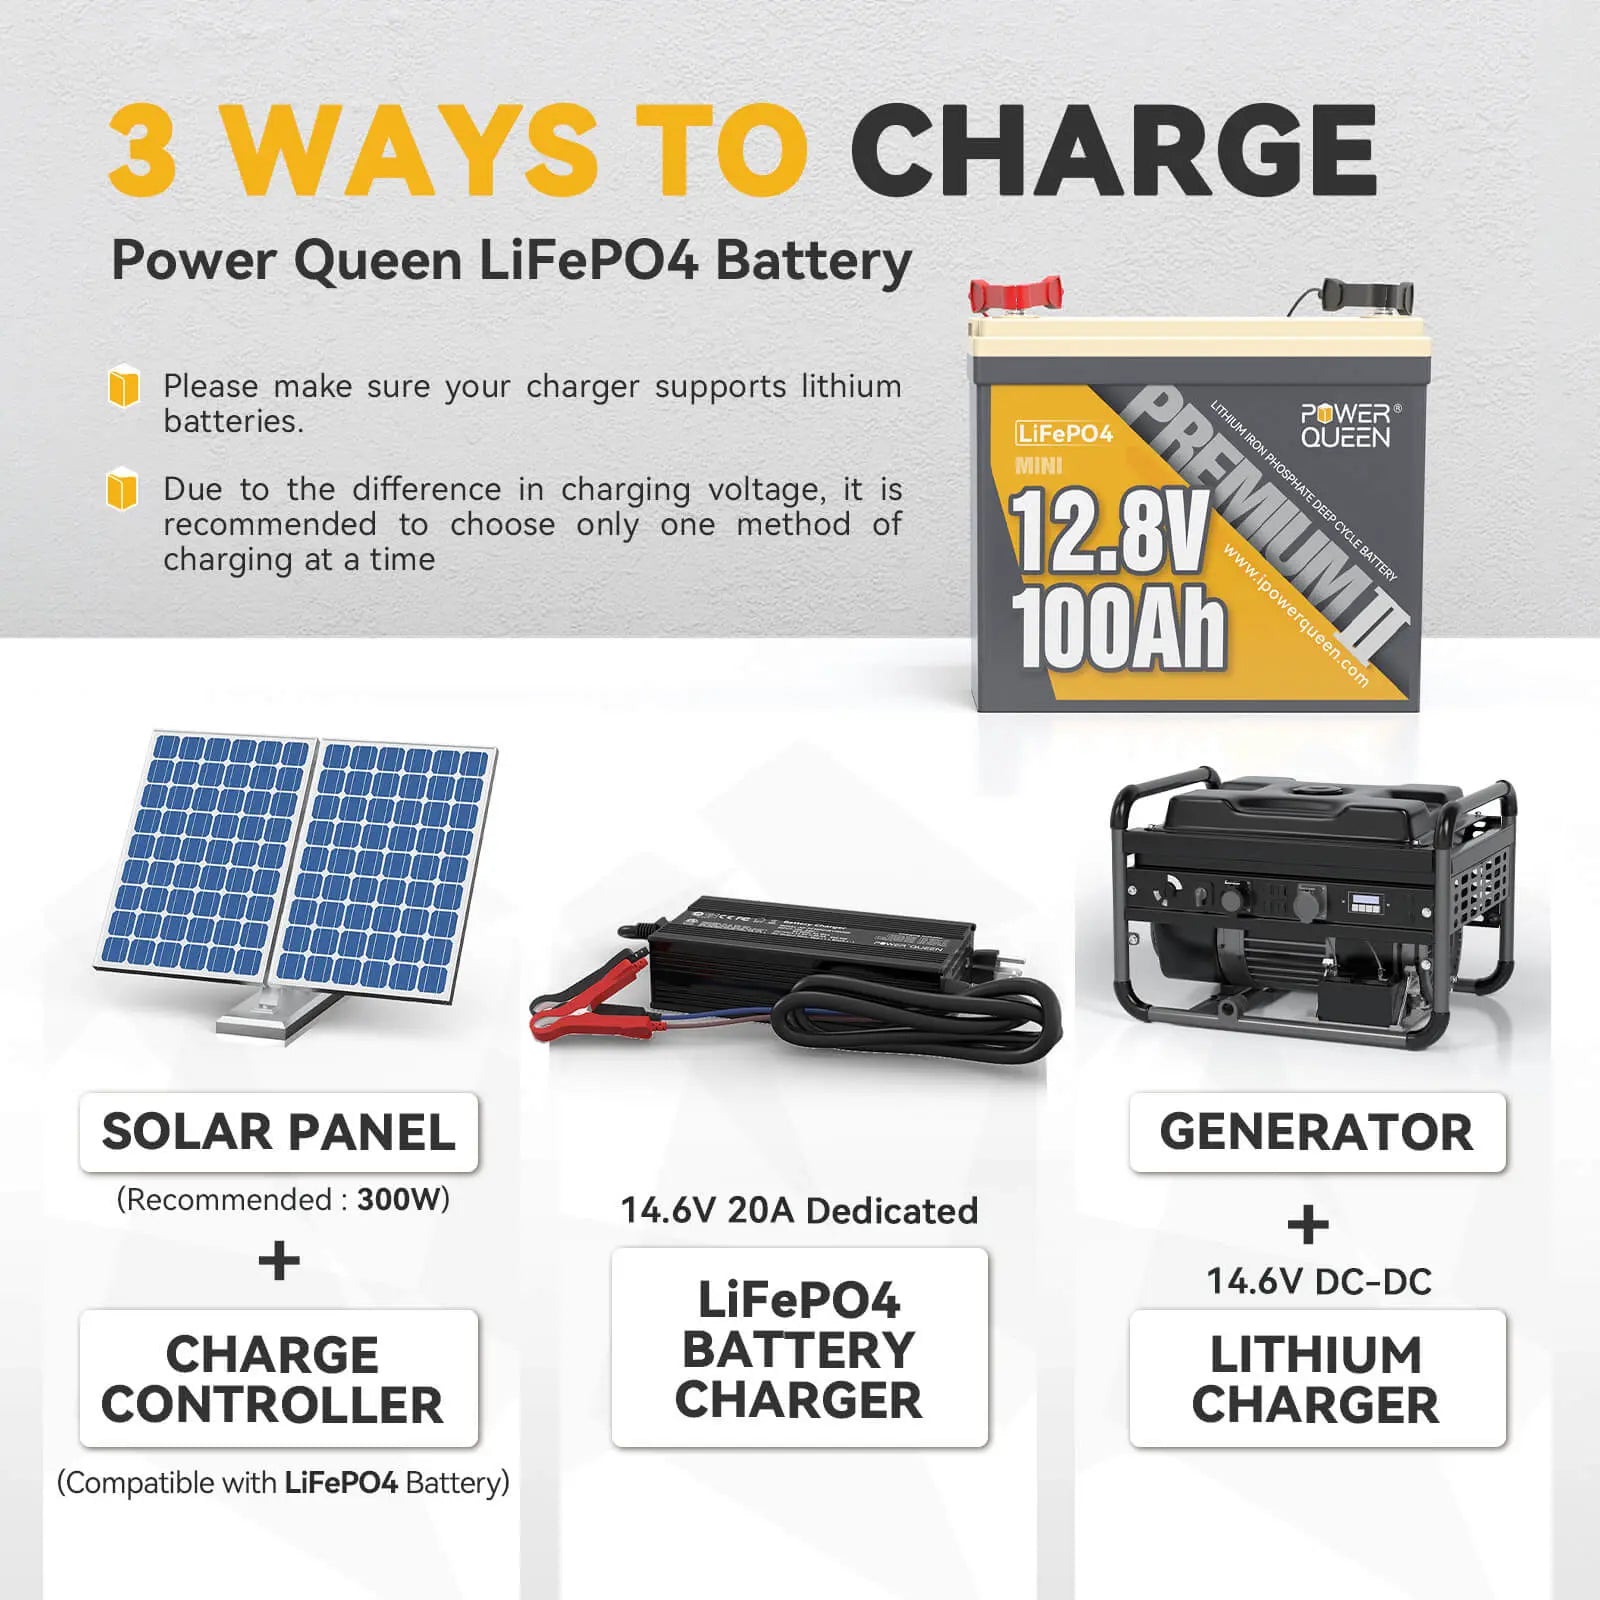     Power-Queen-12V-100Ah-Mini-LiFePO4-Battery-3-ways-to-charge